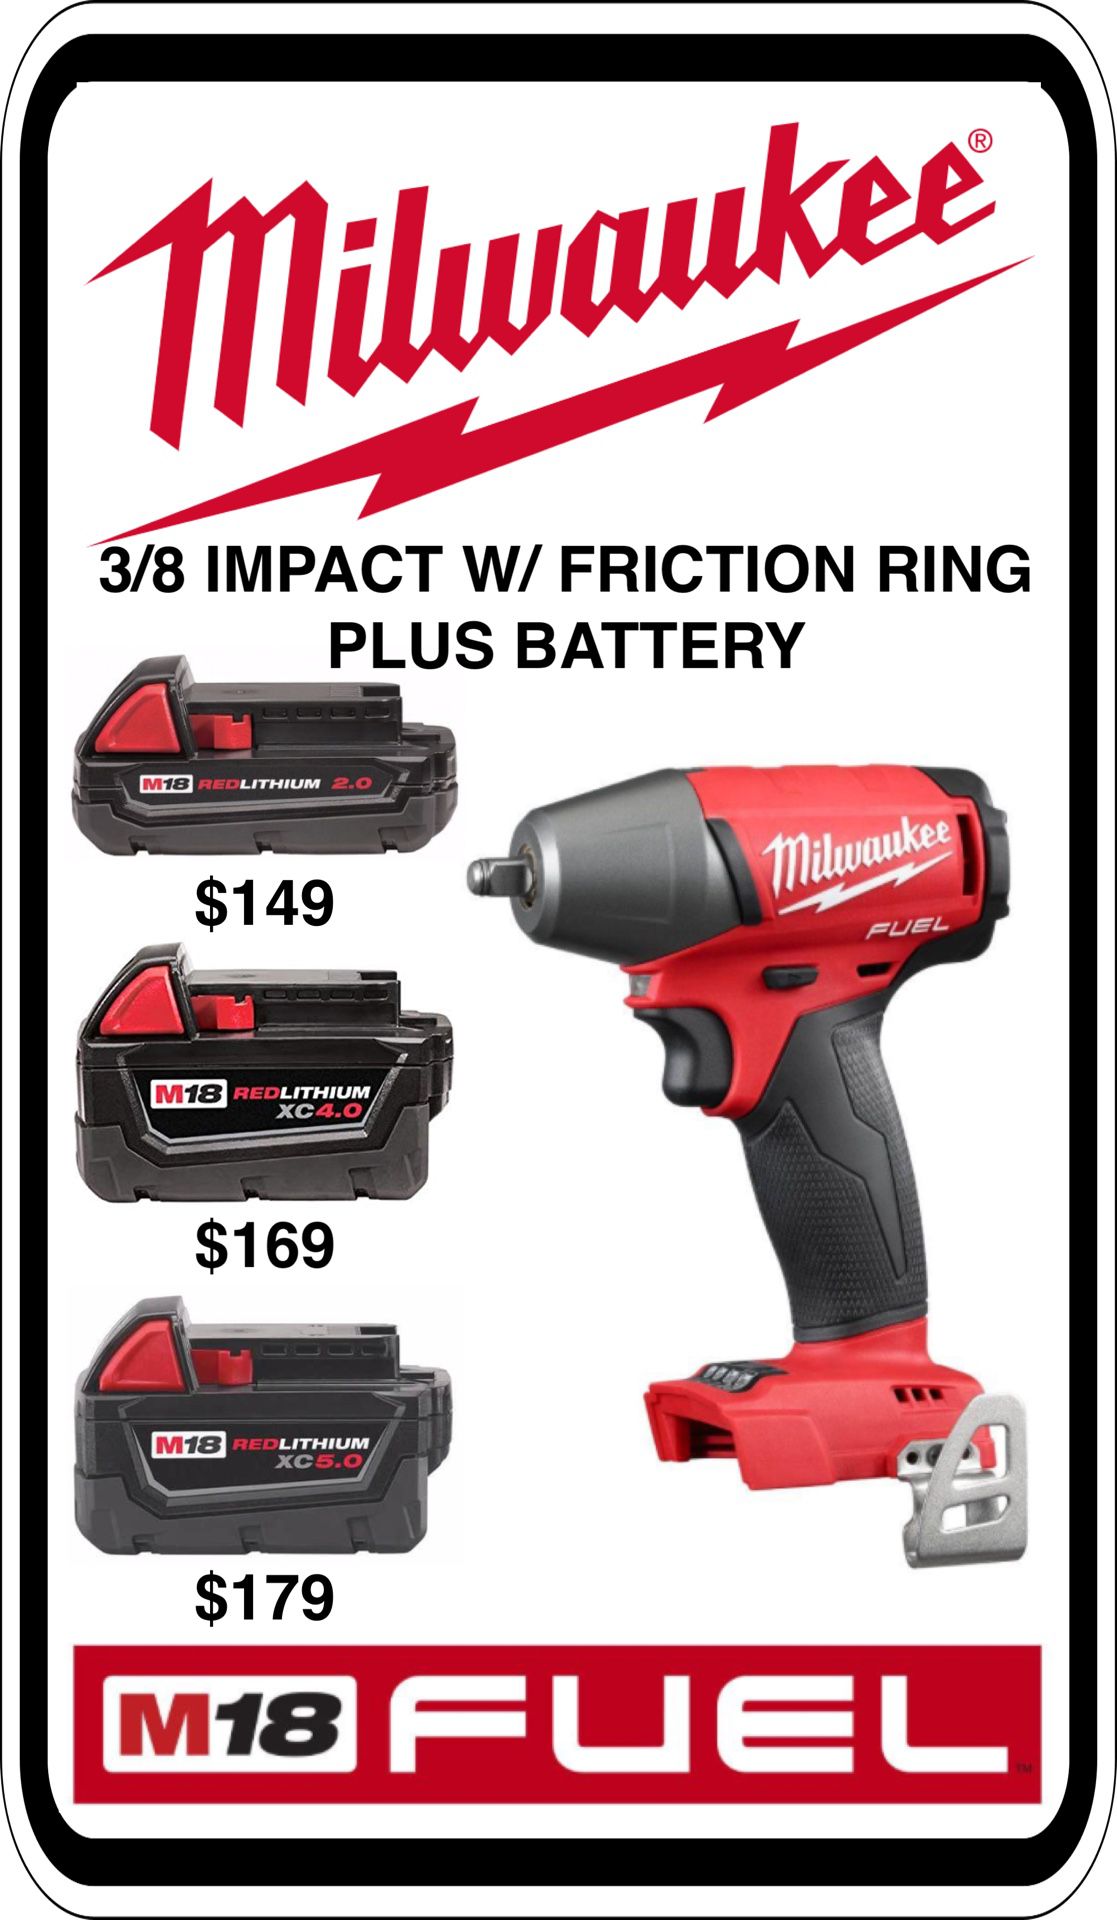 BRAND NEW - Milwaukee M18 3/8 Impact w/ Friction Ring - ADD a Battery - We accept trades & Credit Cards - AzBE Deals